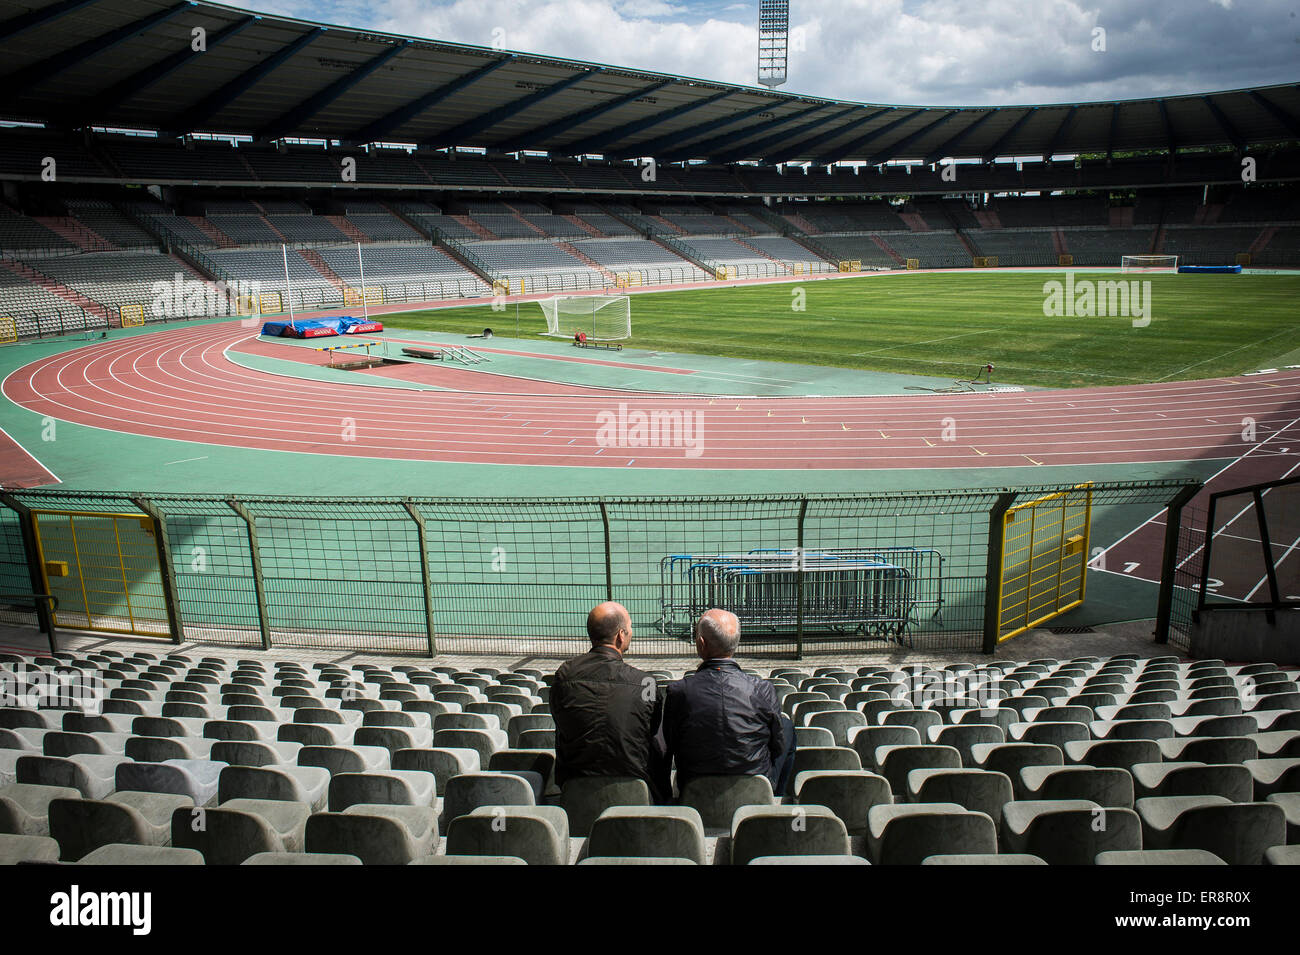 Visitors pay the tribute at the day of the 30th anniversary of the tragedy at the Heysel stadium, renamed King Baudouin Stadium in Brussels, Belgium on 29.05.2015 The Heysel disaster occurred before the start of the 1985 European Cup final Liverpool - Juventus when a wall collapsed under the pressure of escaping fans as result of riots before the start. 39 people died and 600 were injured. by Wiktor Dabkowski Stock Photo